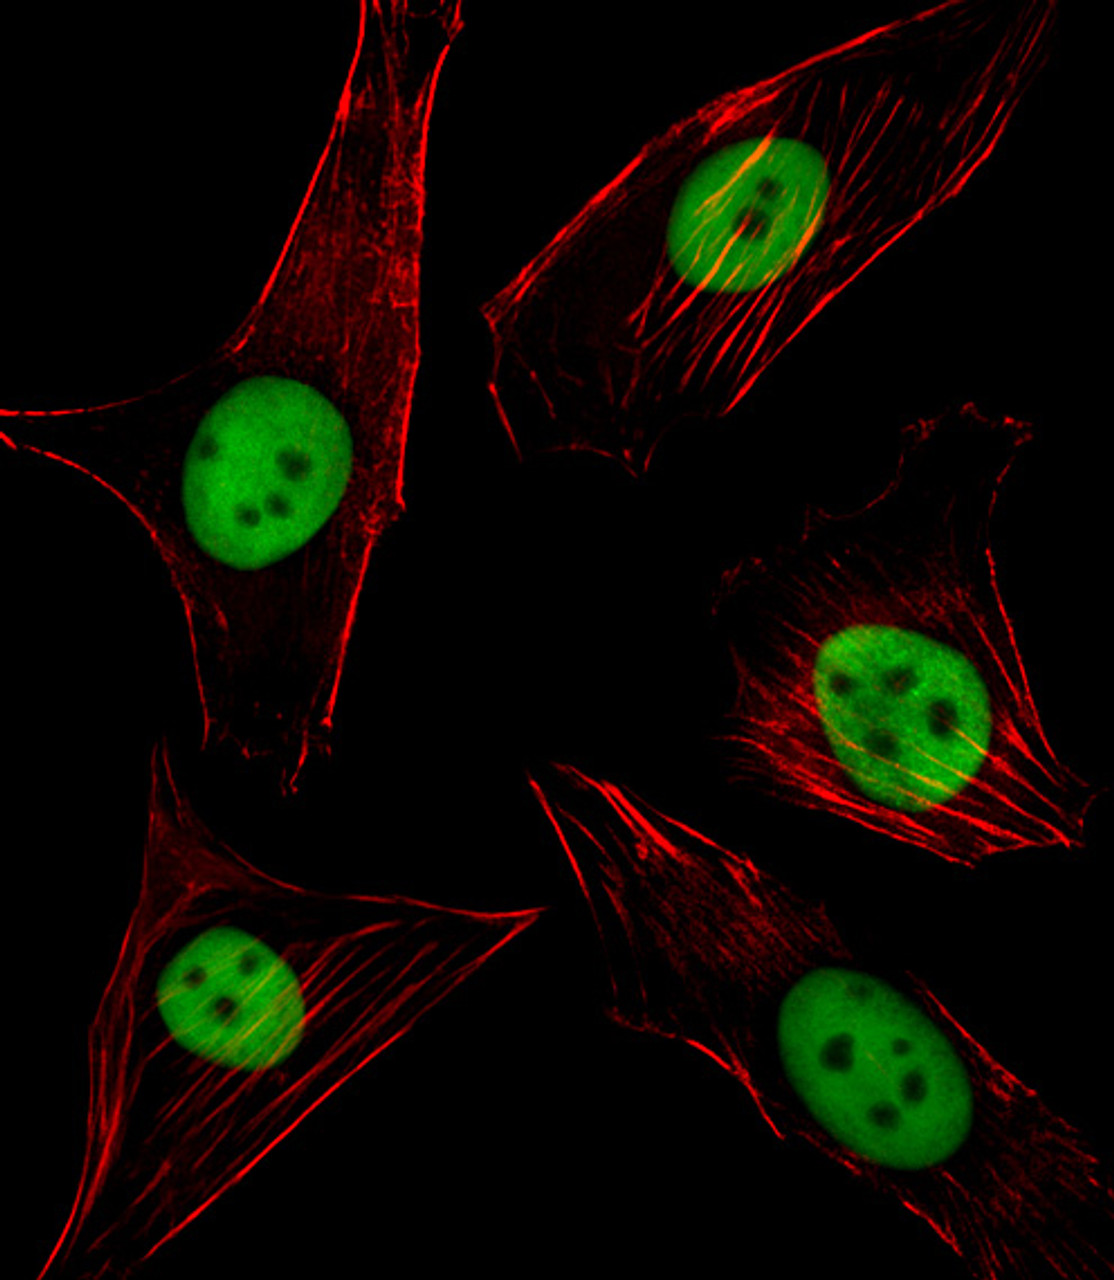 Fluorescent image of NIH/3T3 cell stained with SPI1 Antibody .NIH/3T3 cells were fixed with 4% PFA (20 min) , permeabilized with Triton X-100 (0.1%, 10 min) , then incubated with SPI1 primary antibody (1:25) . For secondary antibody, Alexa Fluor 488 conjugated donkey anti-rabbit antibody (green) was used (1:400) .Cytoplasmic actin was counterstained with Alexa Fluor 555 (red) conjugated Phalloidin (7units/ml) . SPI1 immunoreactivity is localized to Nucleus significantly.